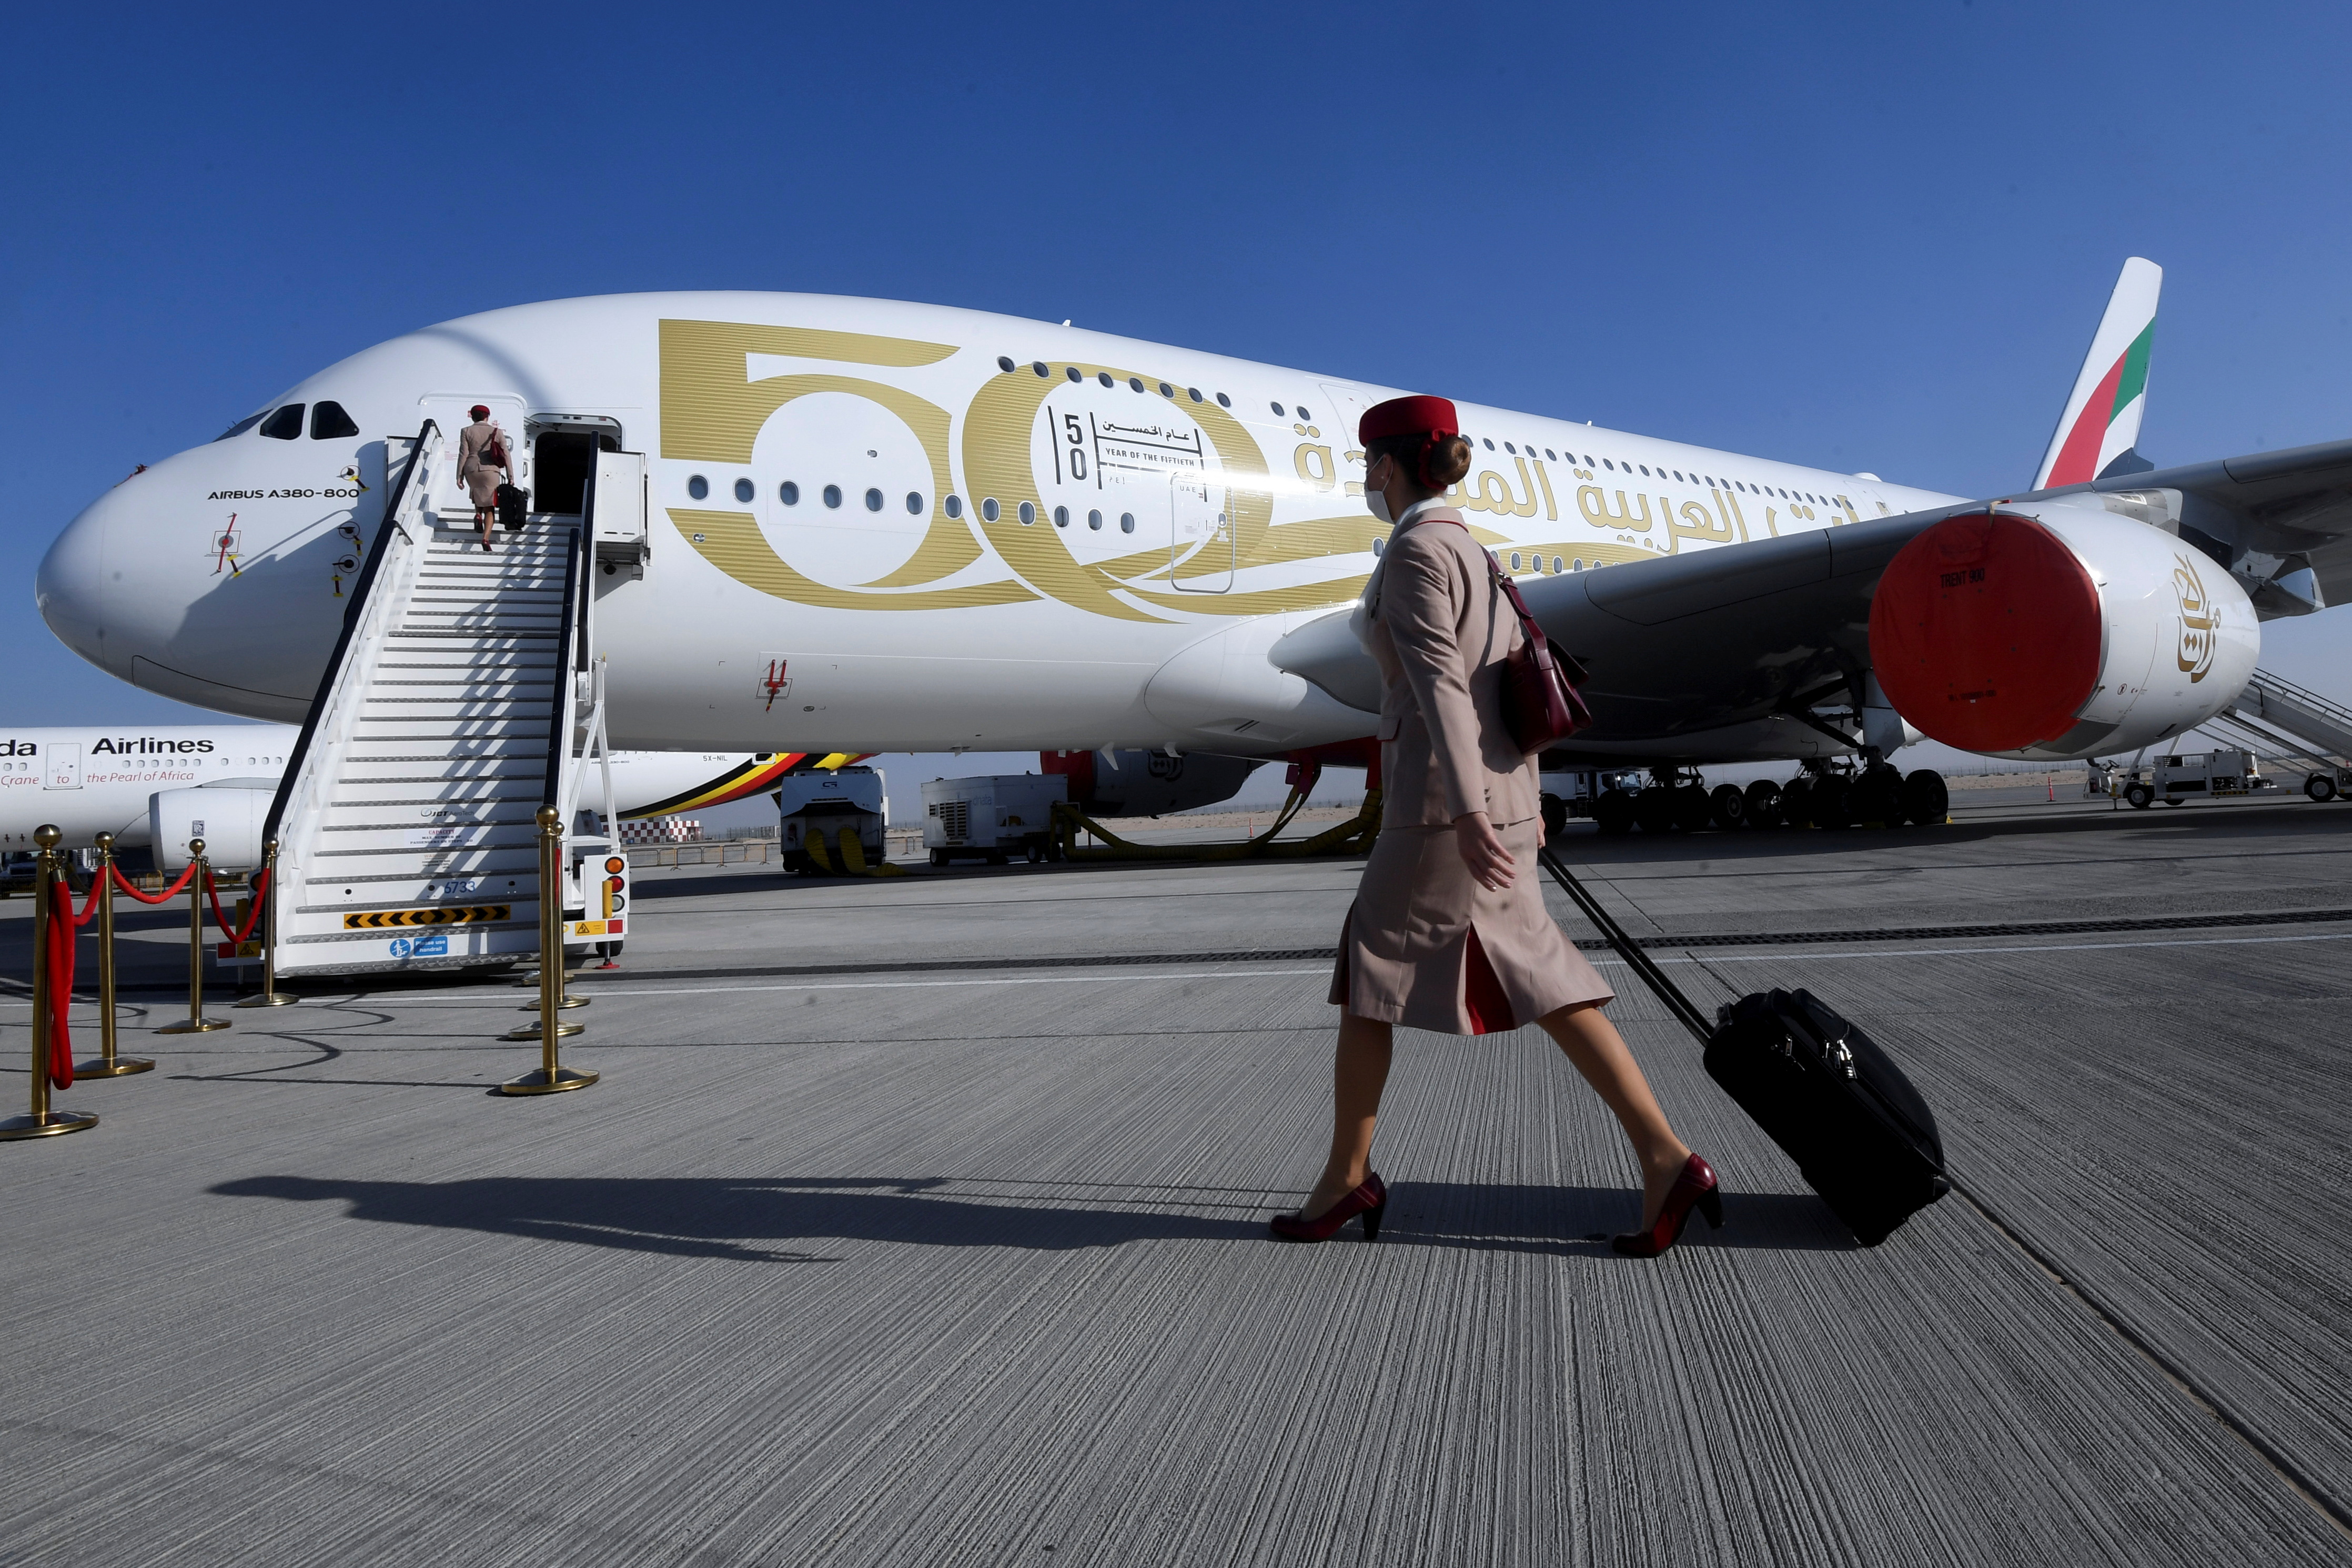 A crew member of the Emirates airline walks past an Emirates plane during the Dubai Air Show in Dubai, United Arab Emirates, November 15, 2021. REUTERS/Stringer